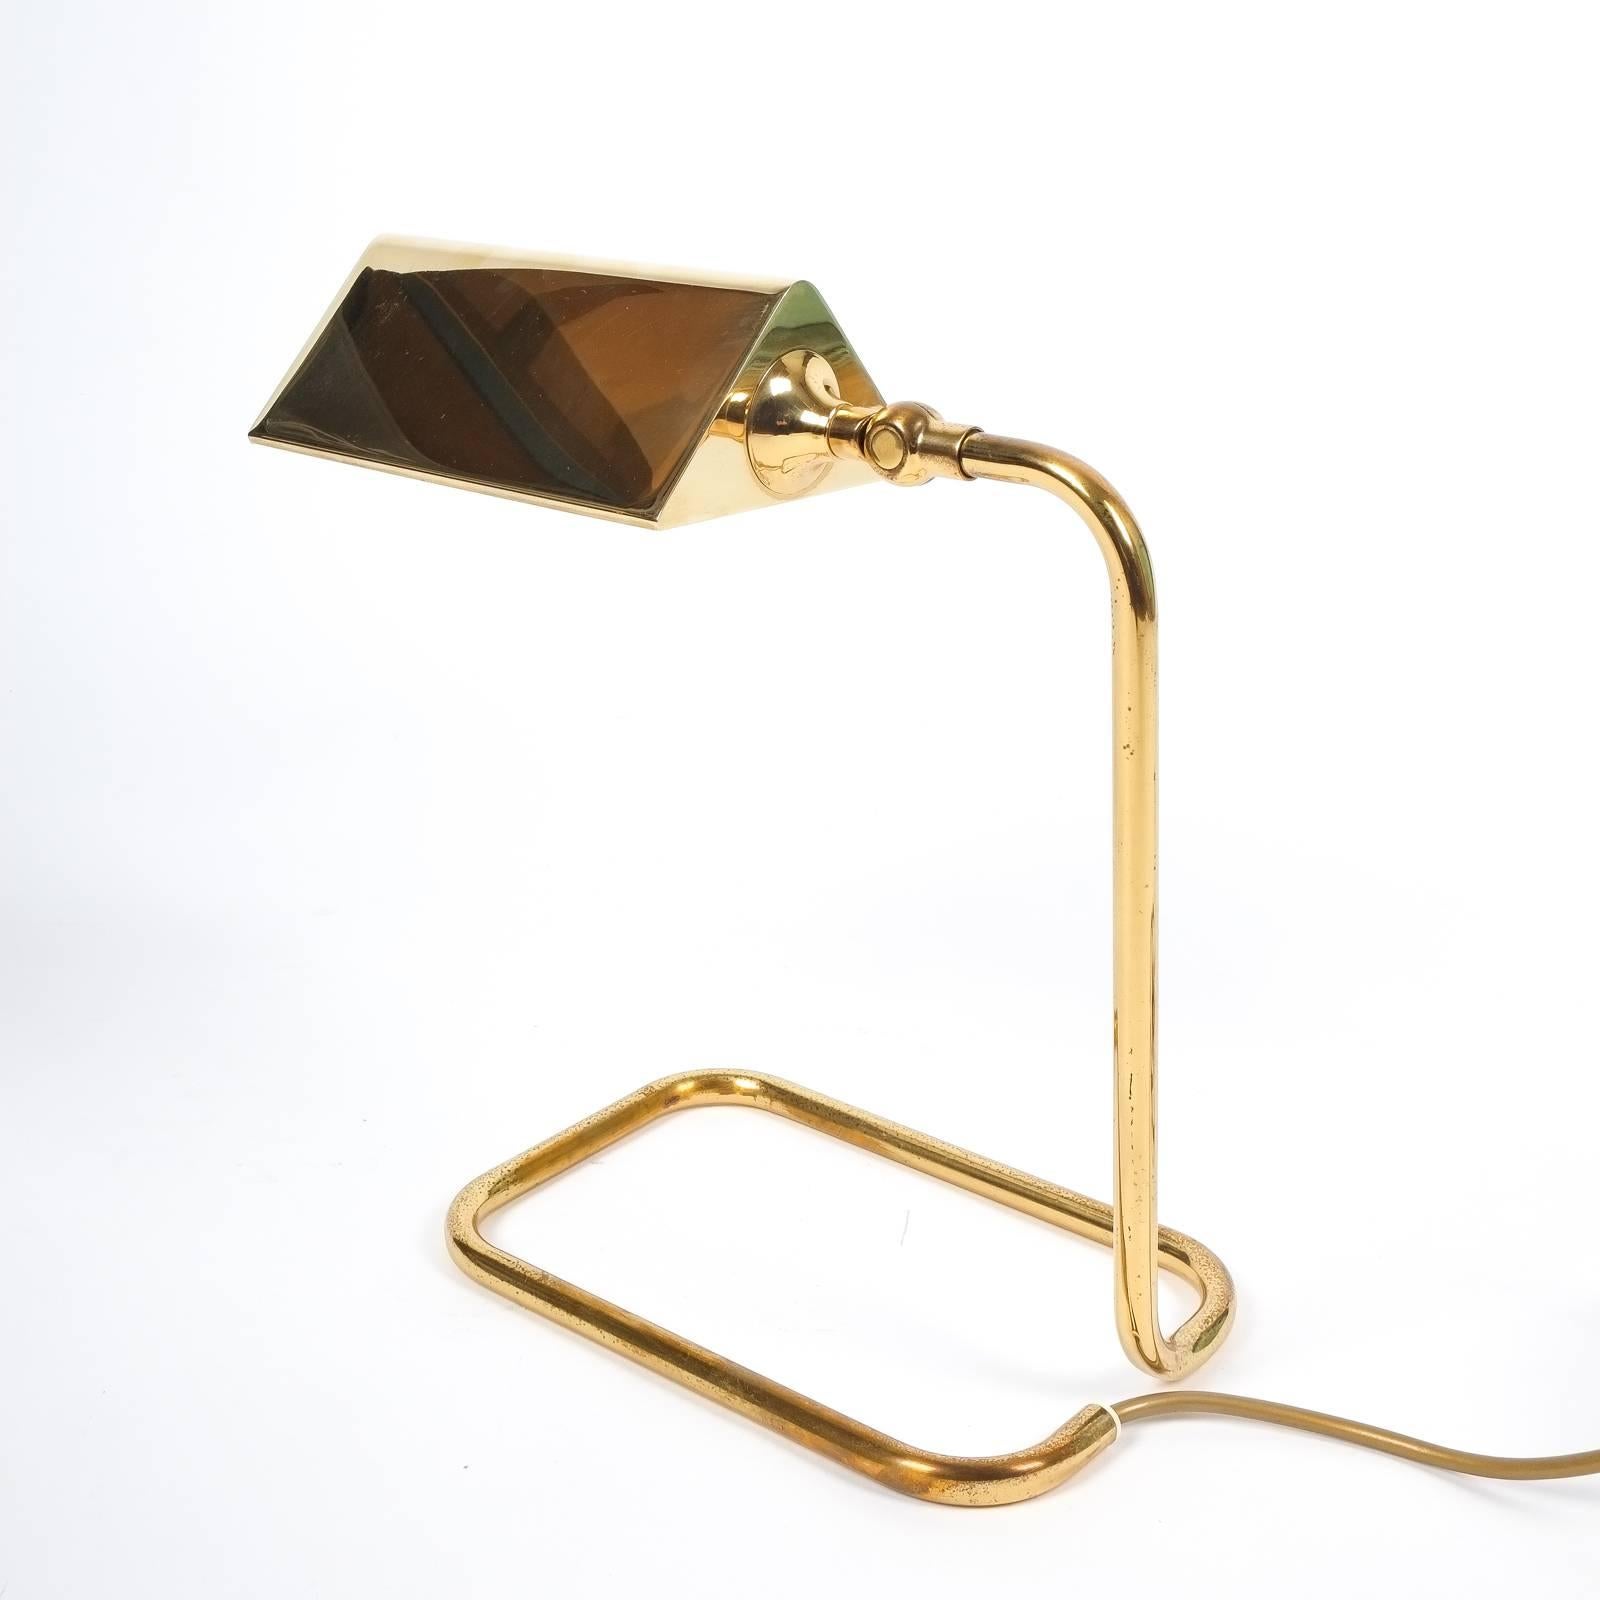 Nice table light by Koch Lowy, circa 1960 featuring a bent brass base and polished brass shade. It holds a single large bulb with 60W maximum and is in excellent condition.